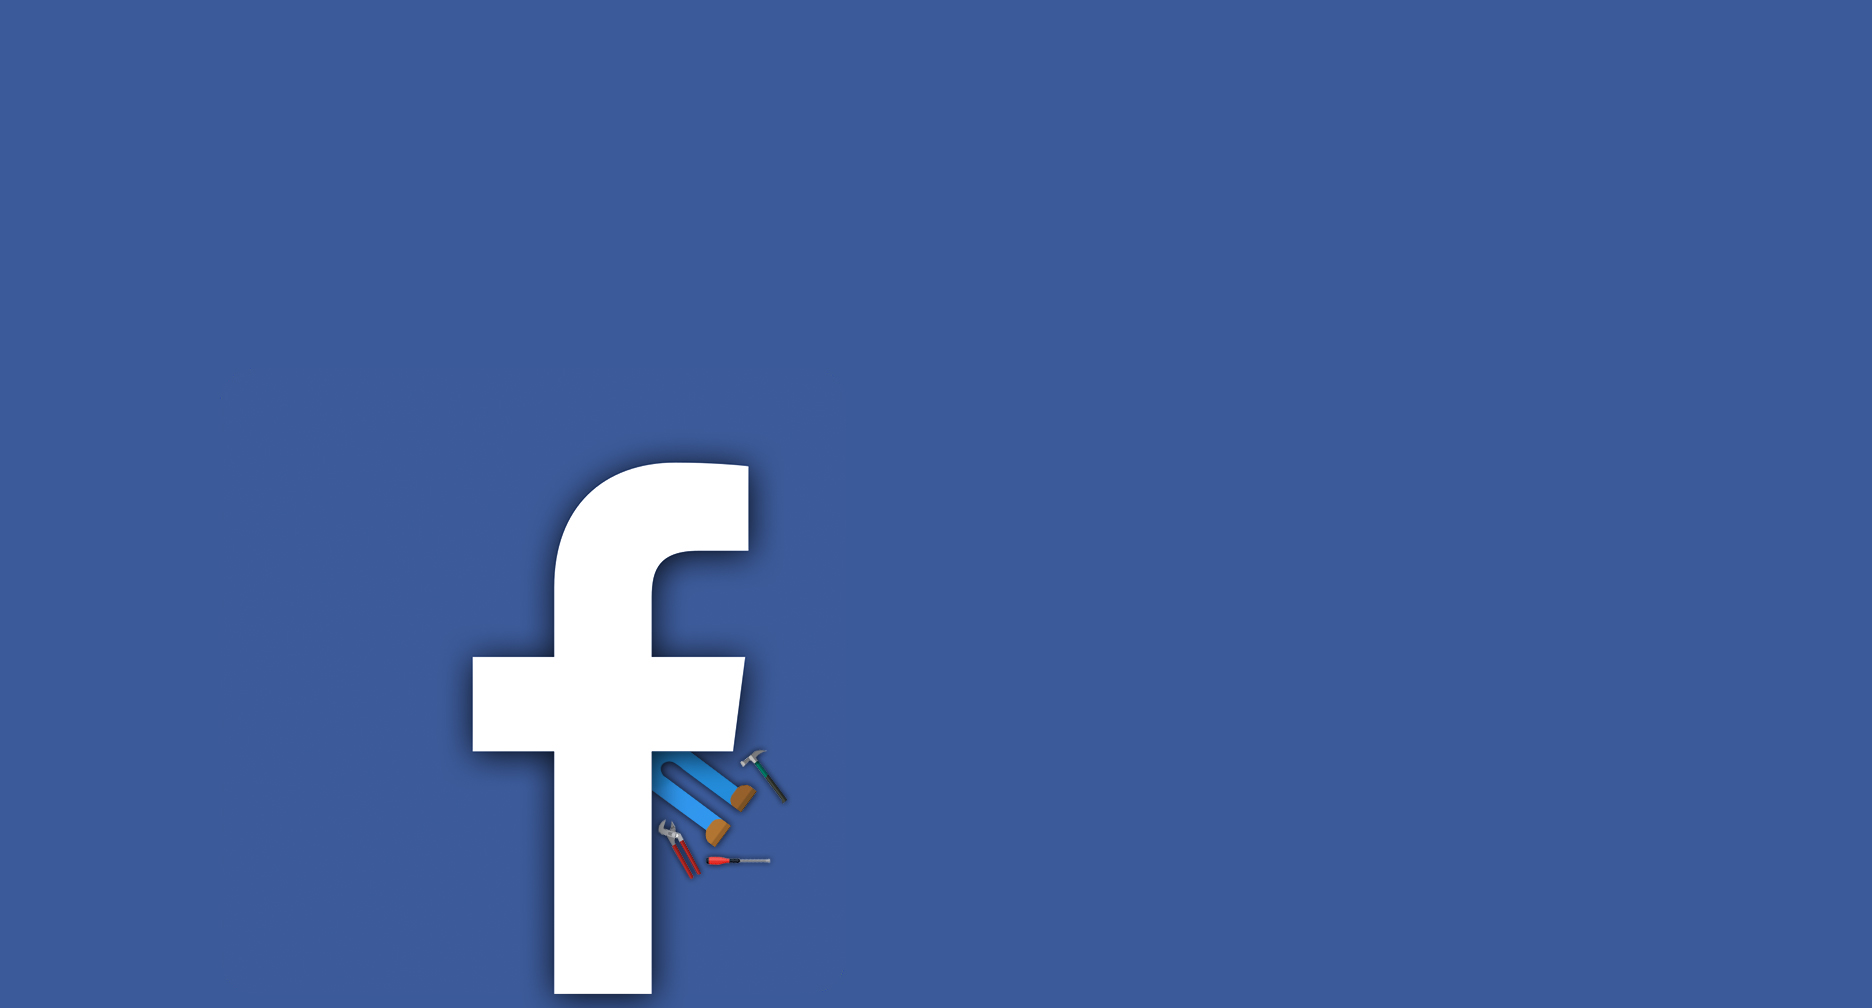 A mechanic and the Facebook logo.